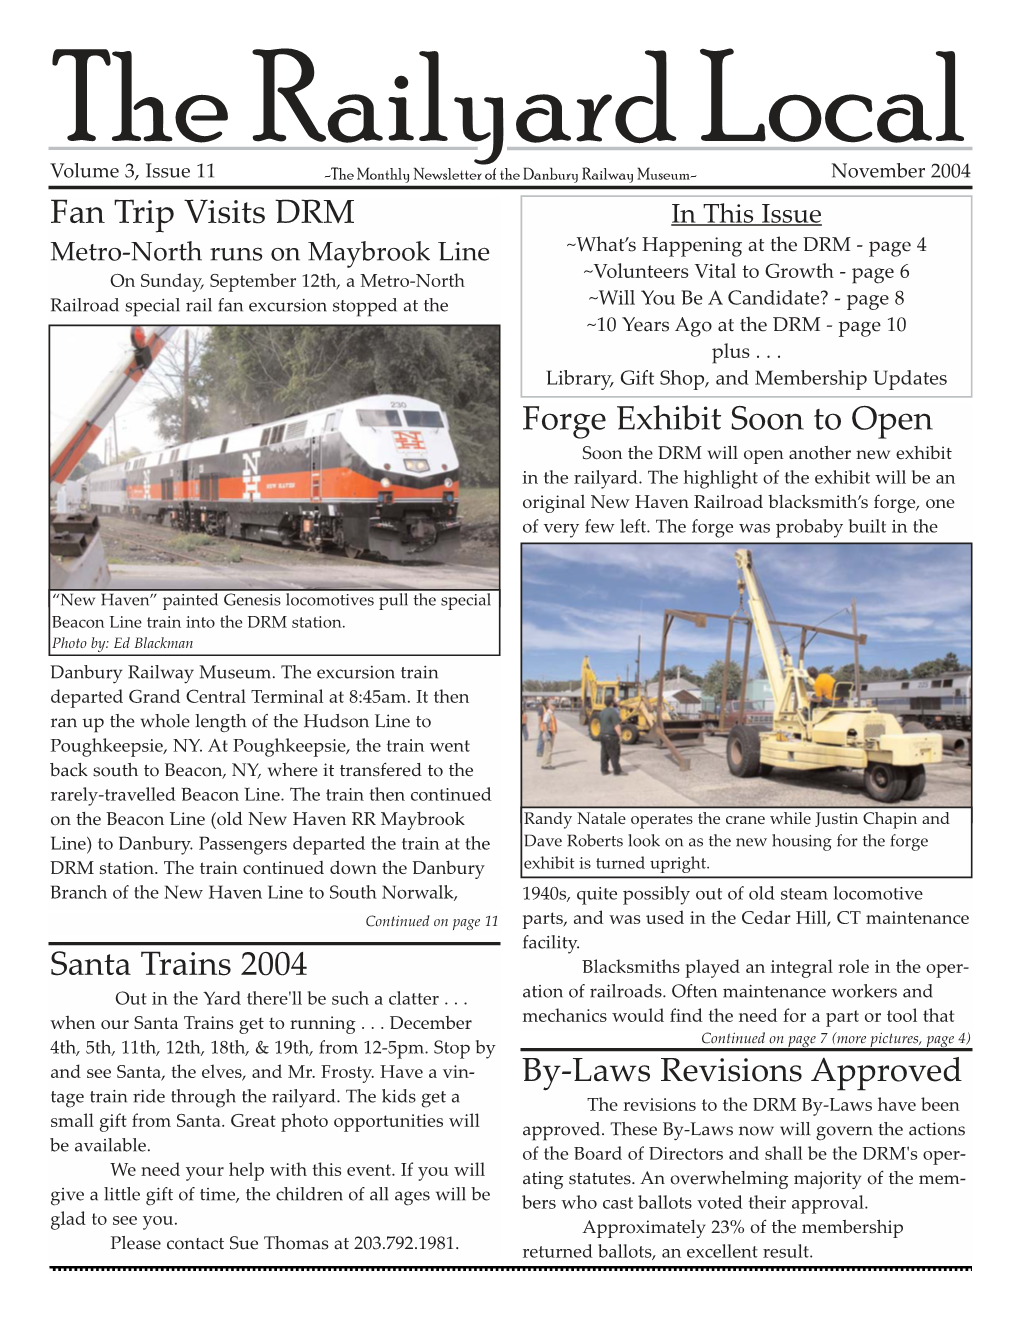 By-Laws Revisions Approved Santa Trains 2004 Fan Trip Visits DRM Forge Exhibit Soon to Open